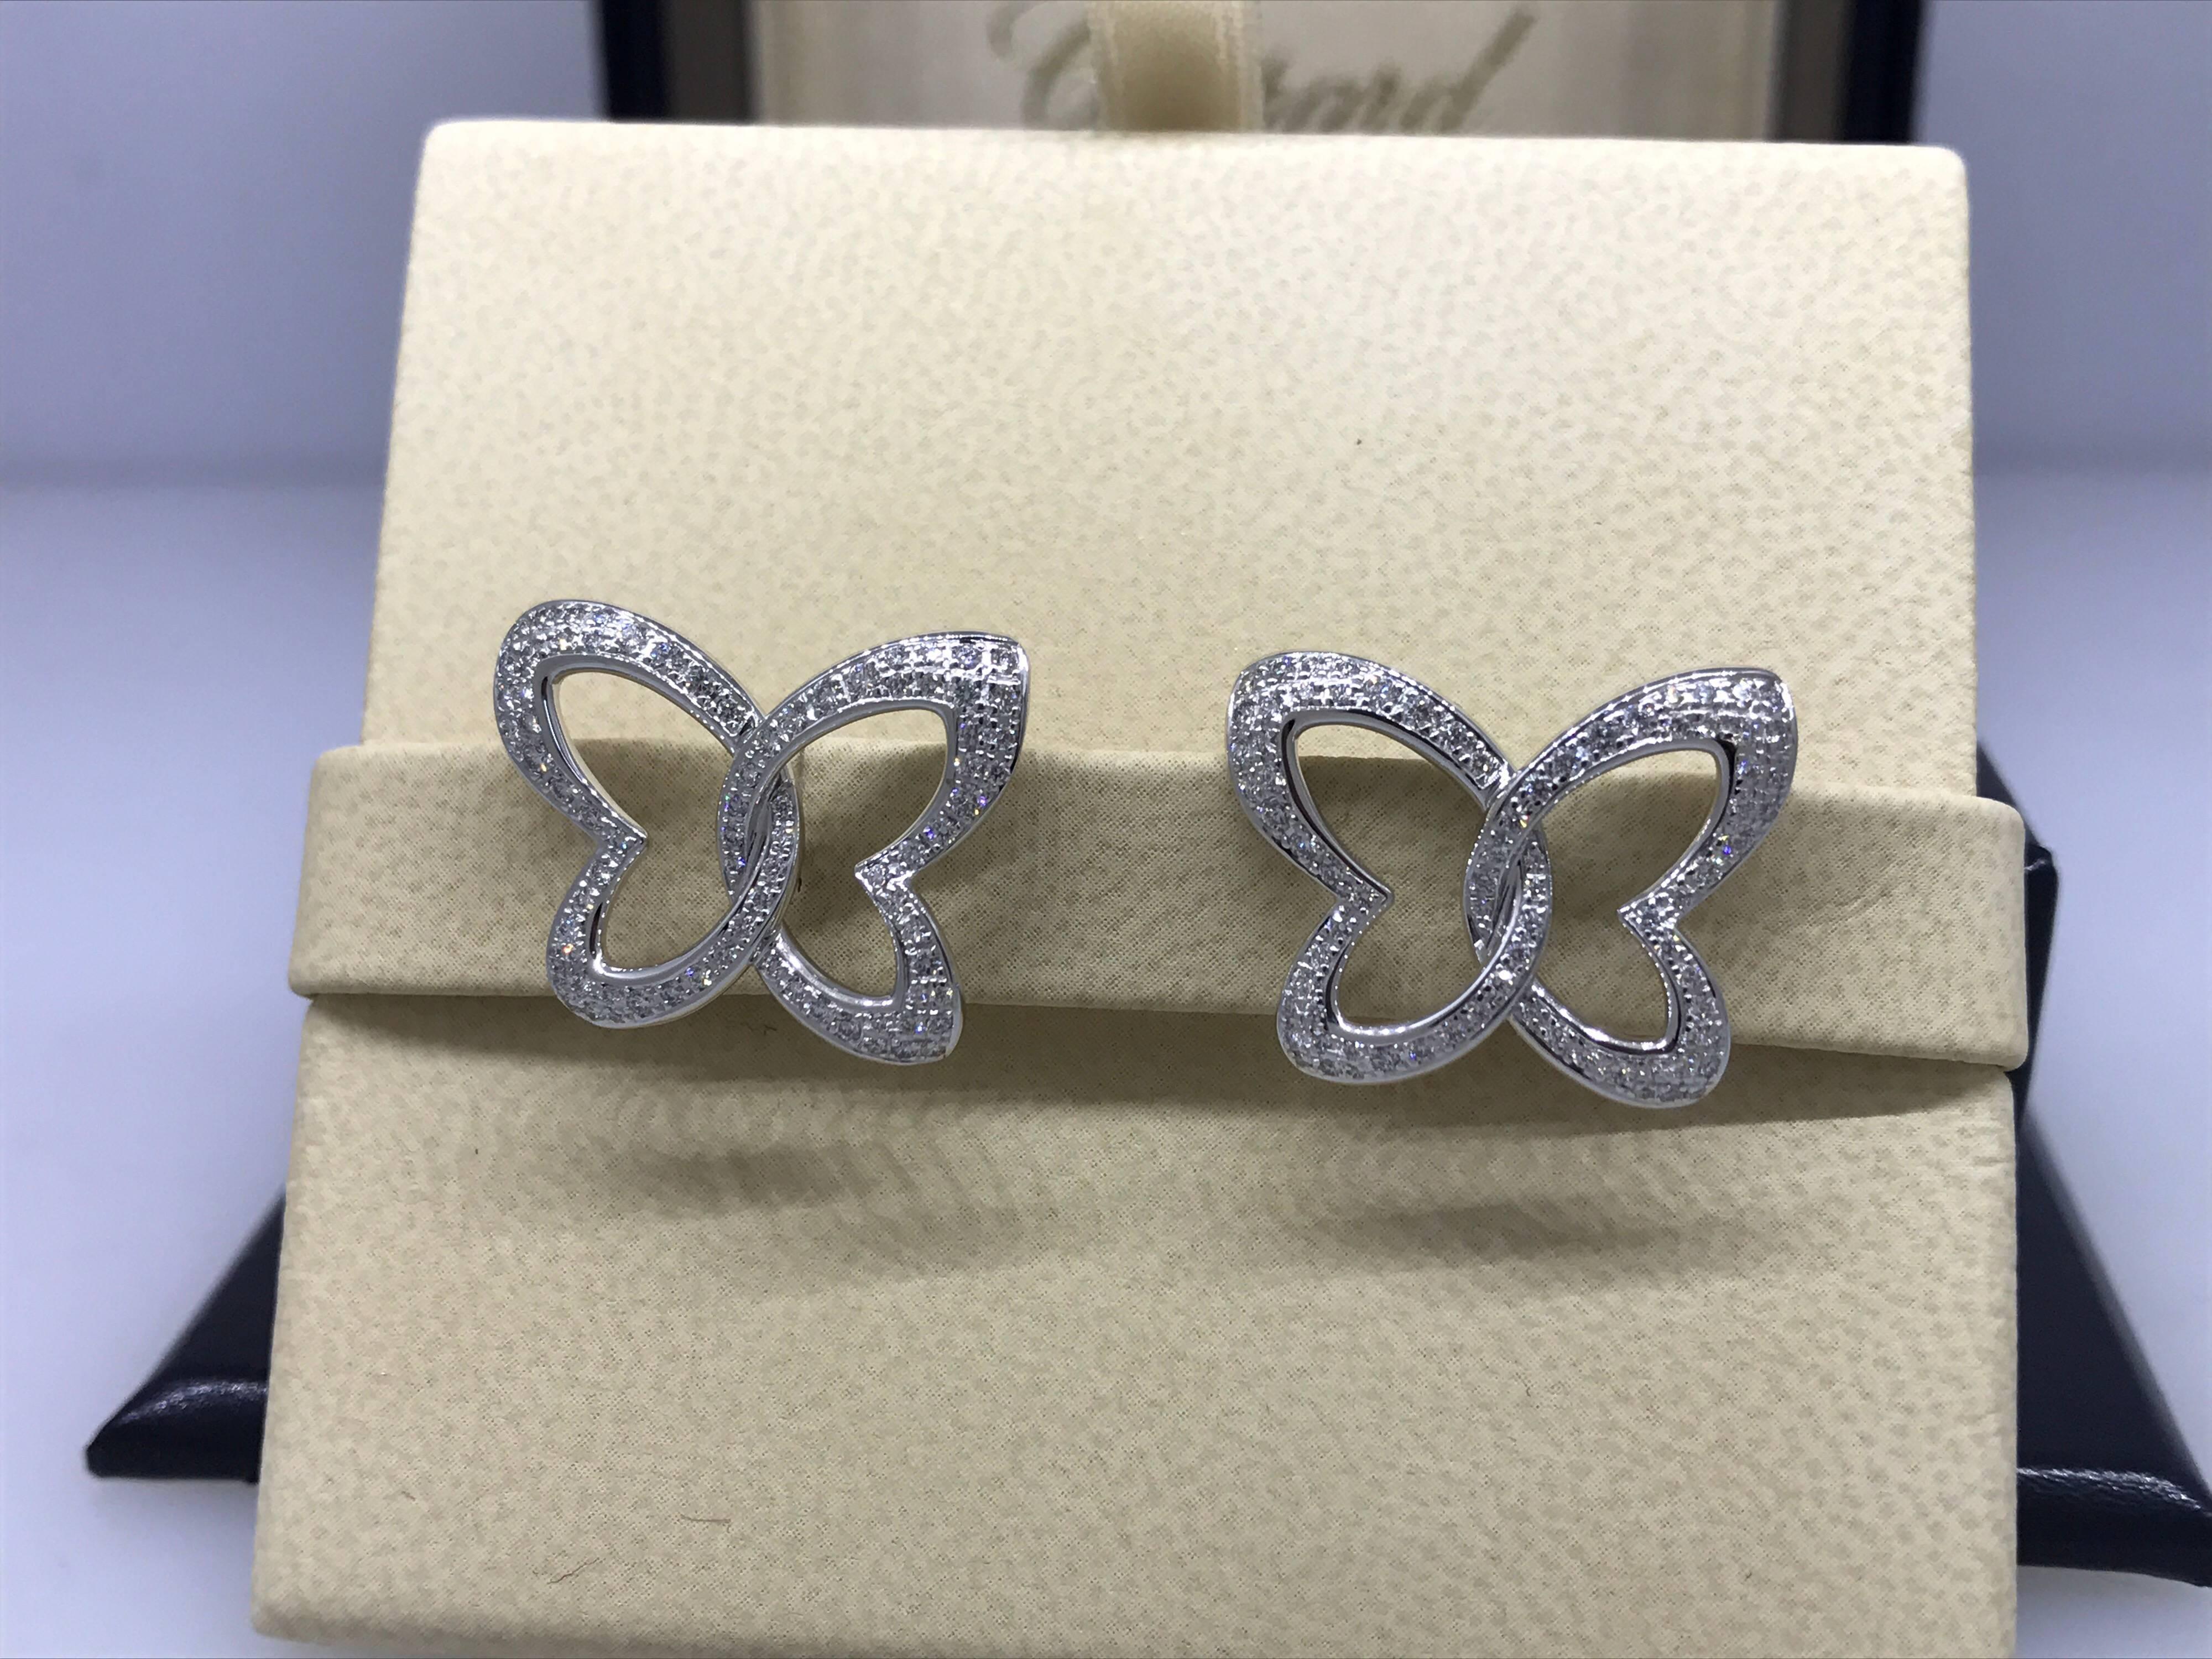 Chopard 18 Karat Gold and Diamond Stud Ladies Earrings 83/7445-1002 In New Condition For Sale In New York, NY